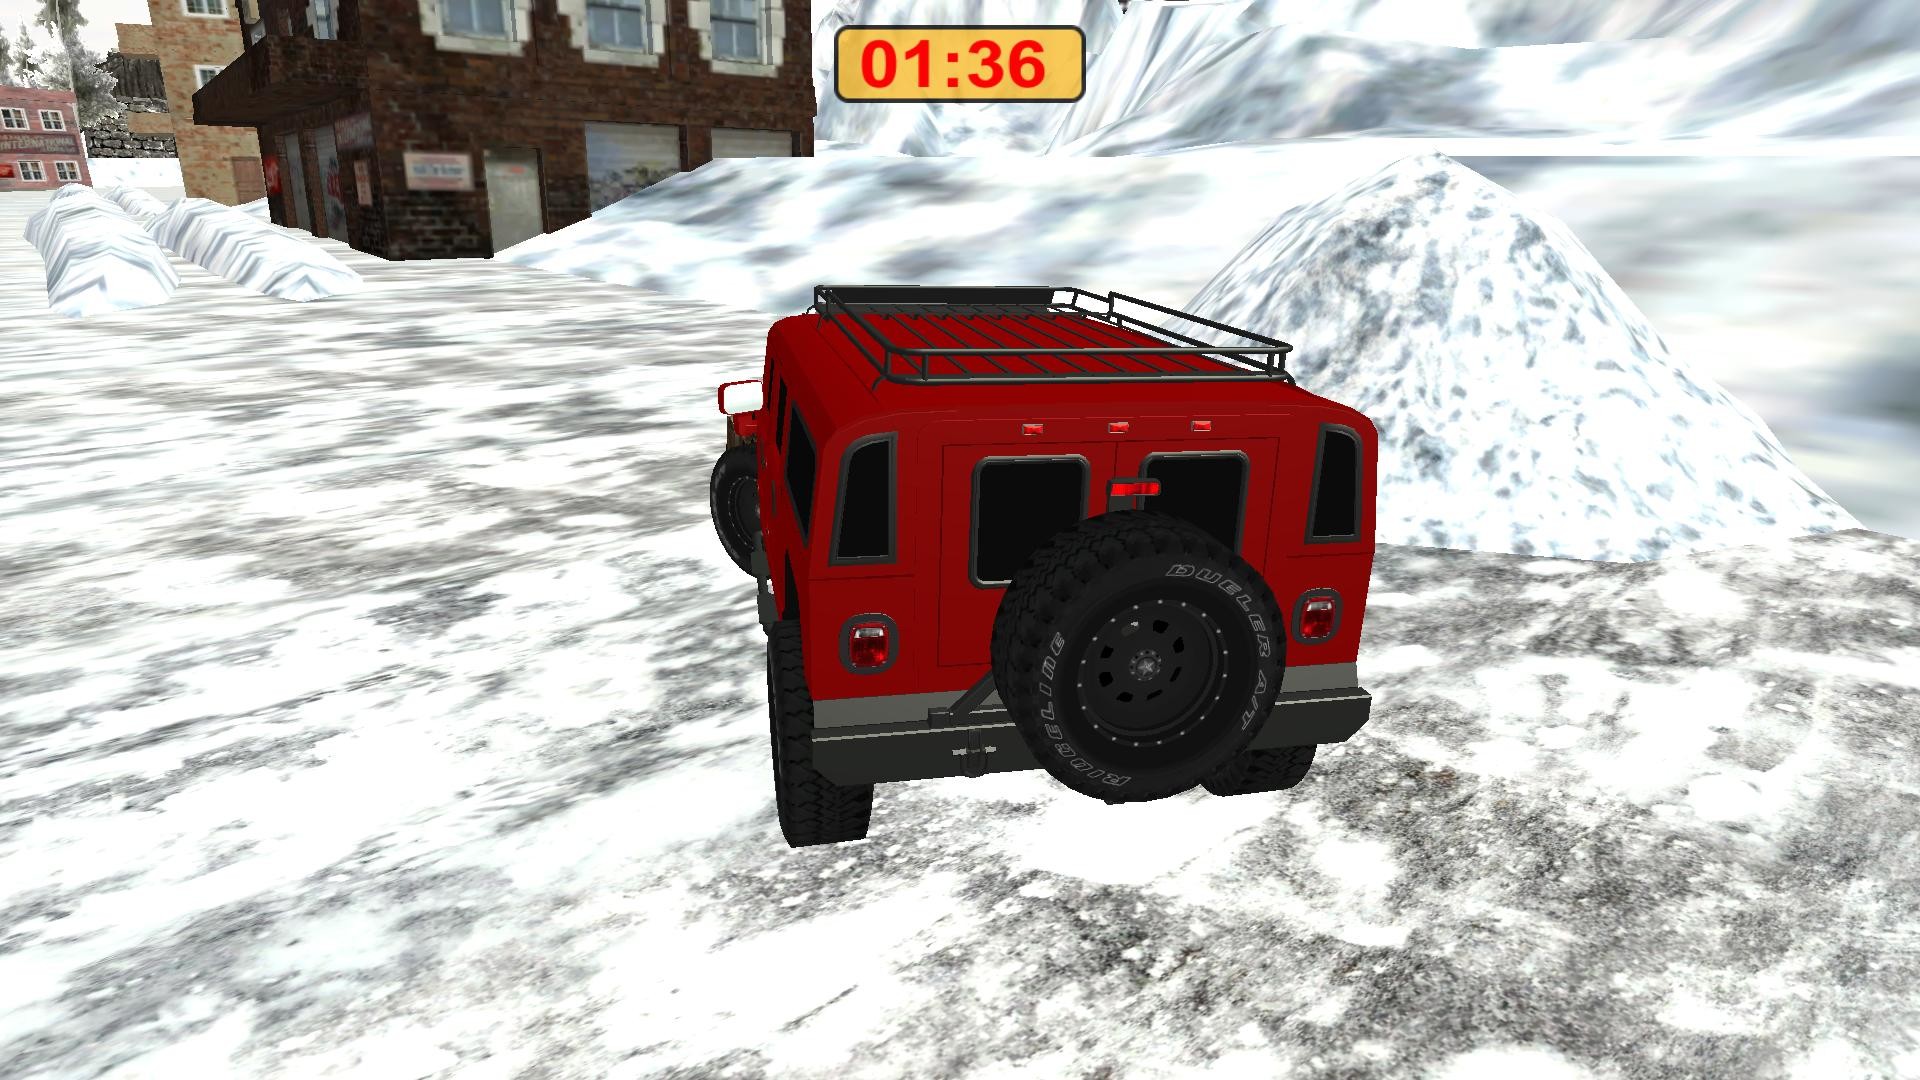 Snow Clearing Driving Simulator Steam CD Key 5.12 $